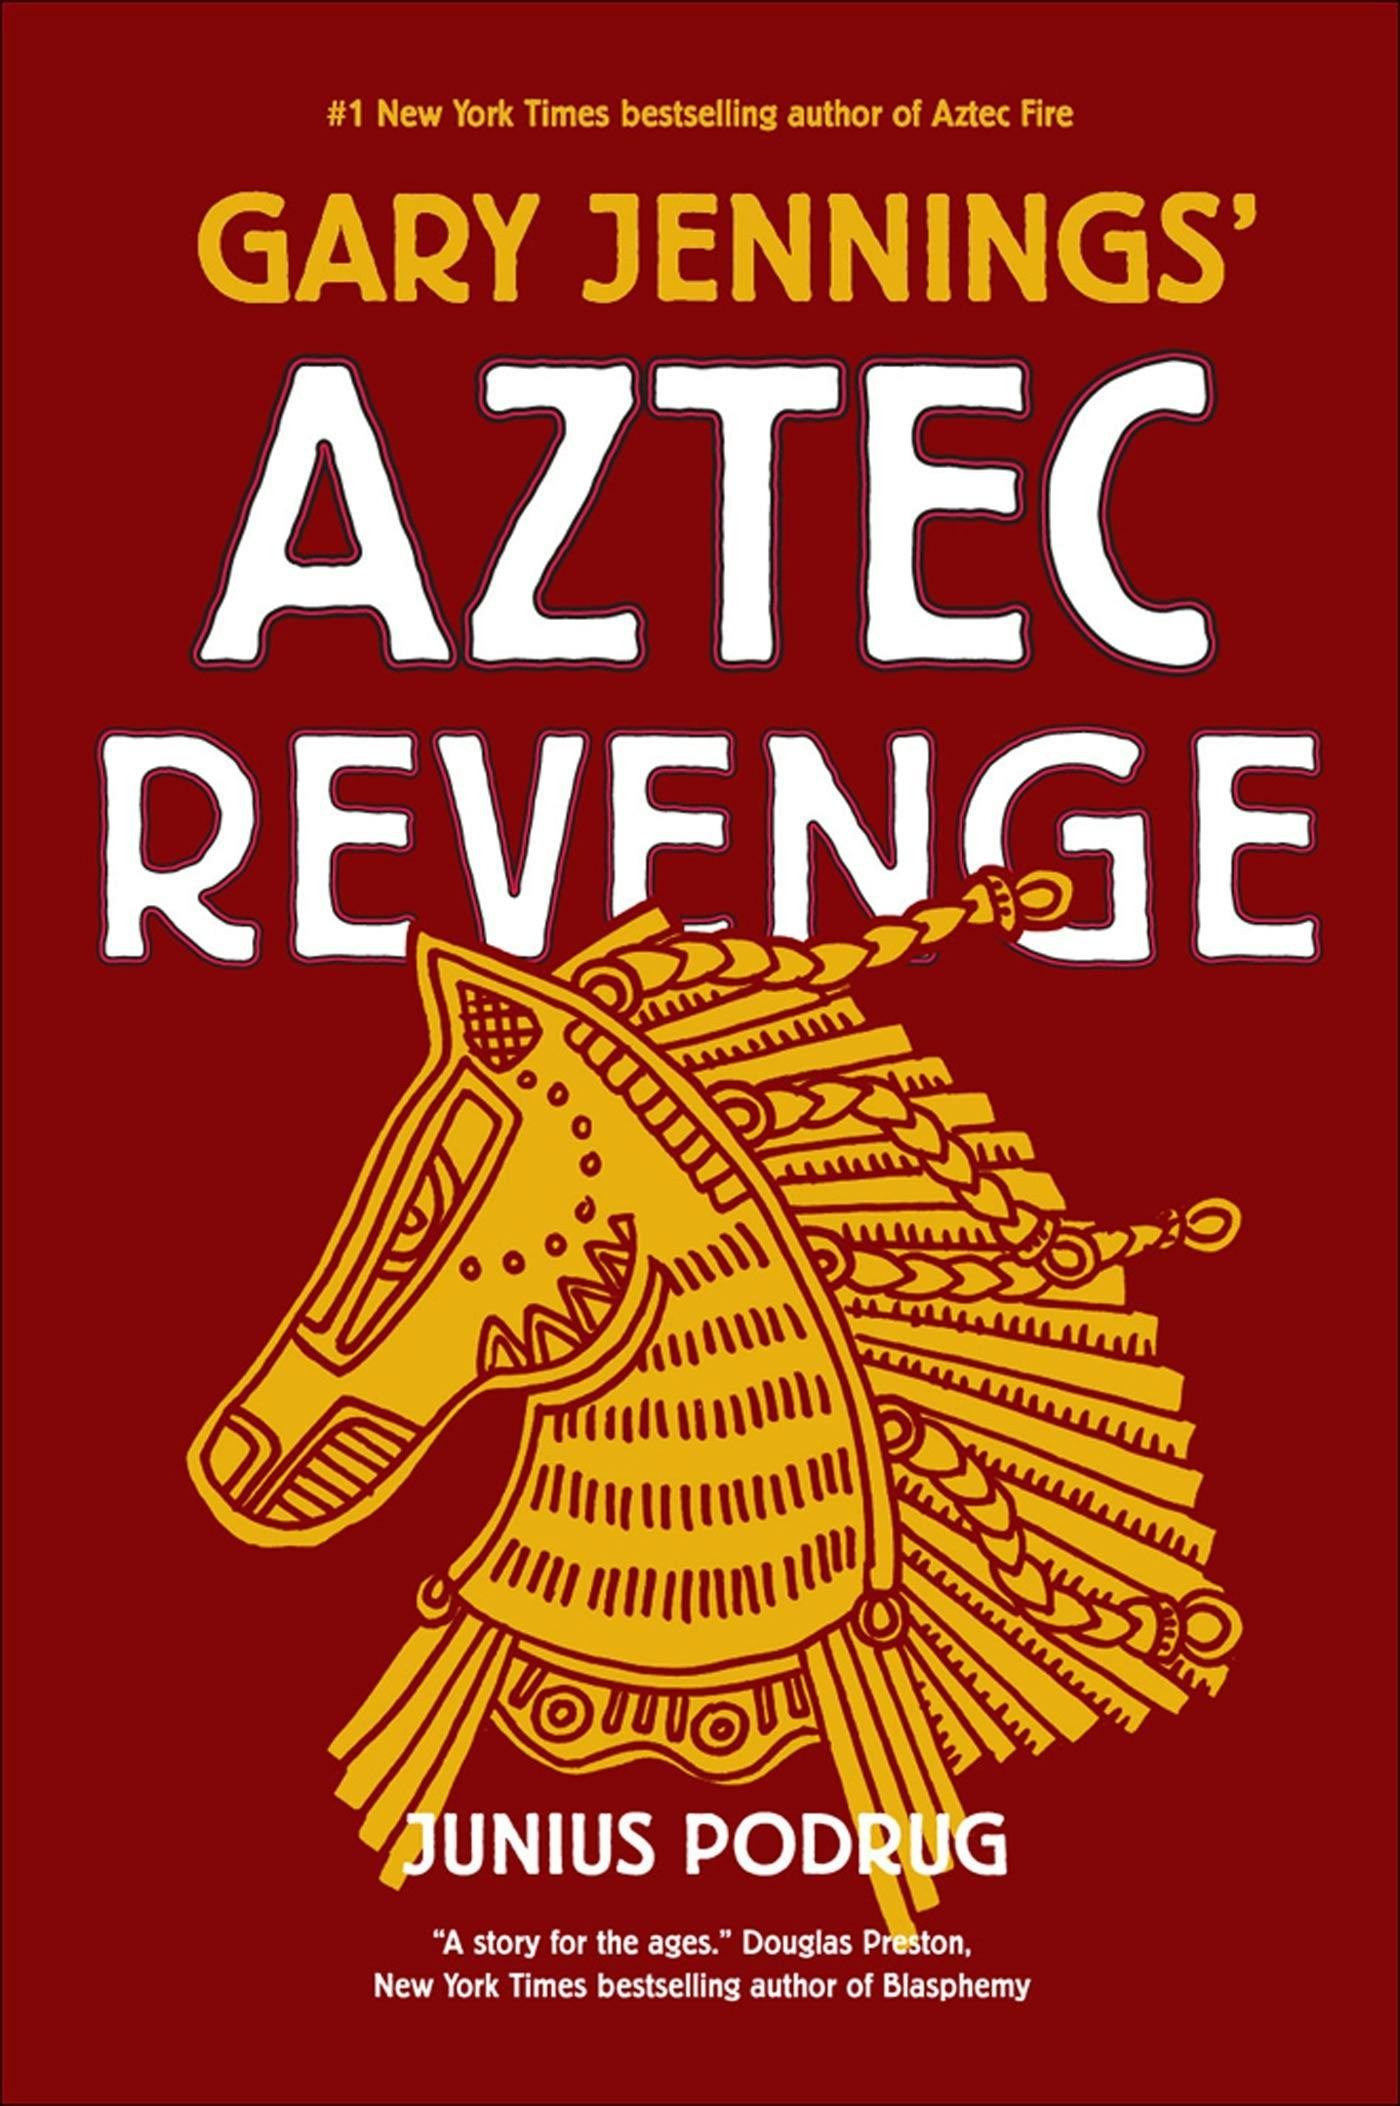 Cover for the book titled as: Aztec Revenge